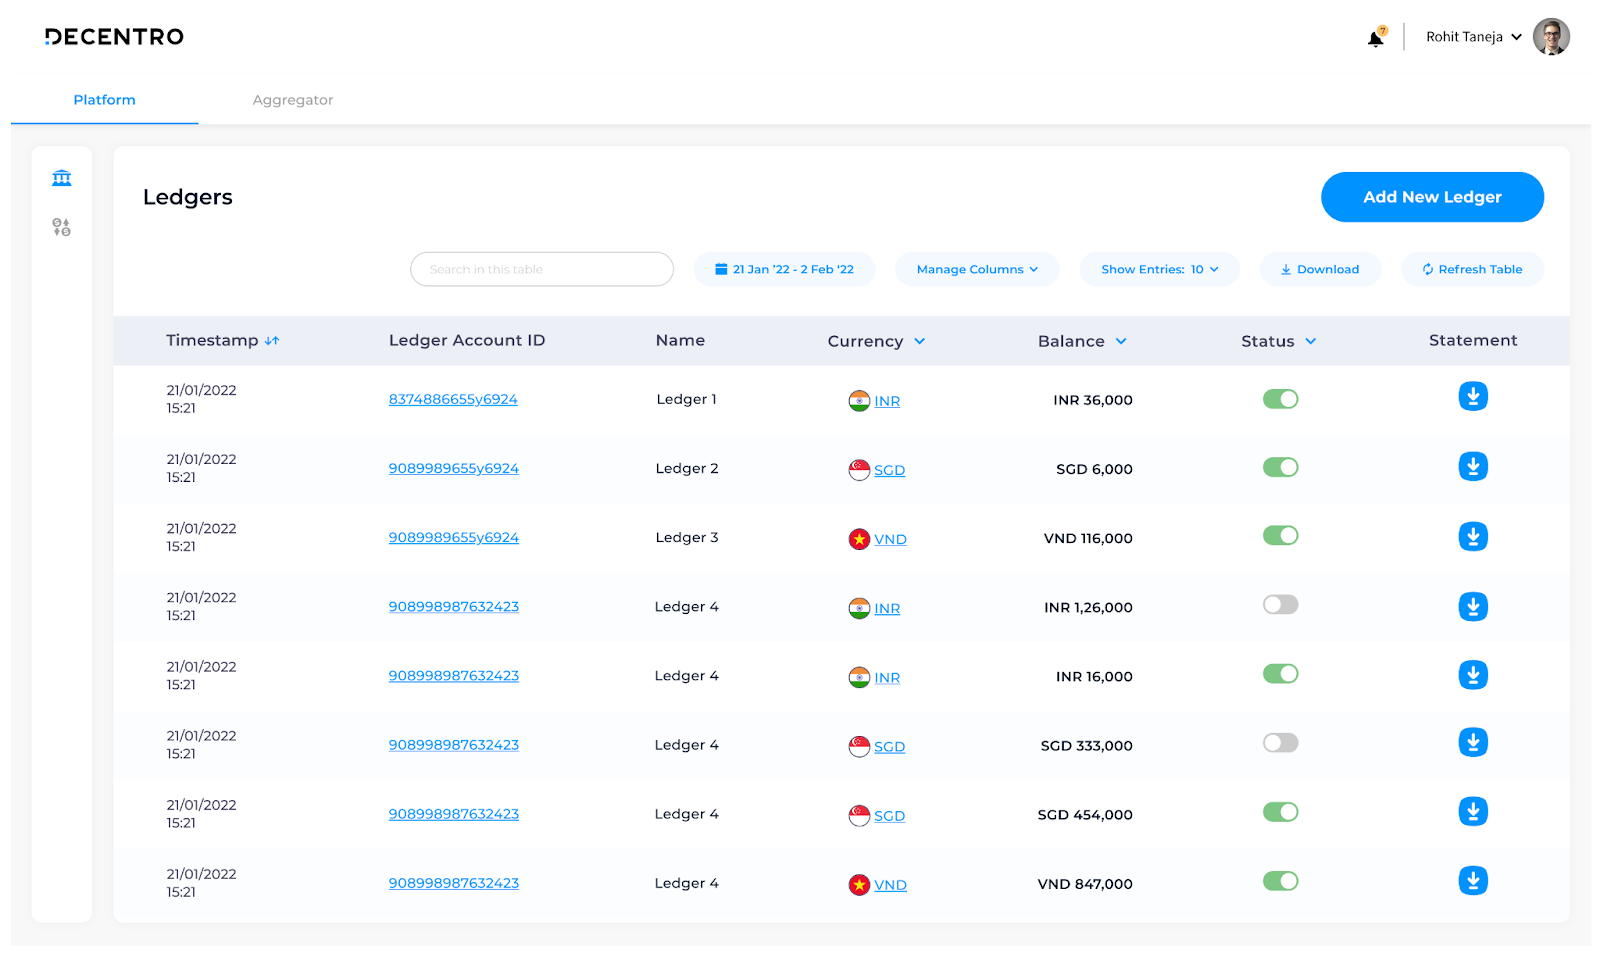 View of Decentro's Dashboard